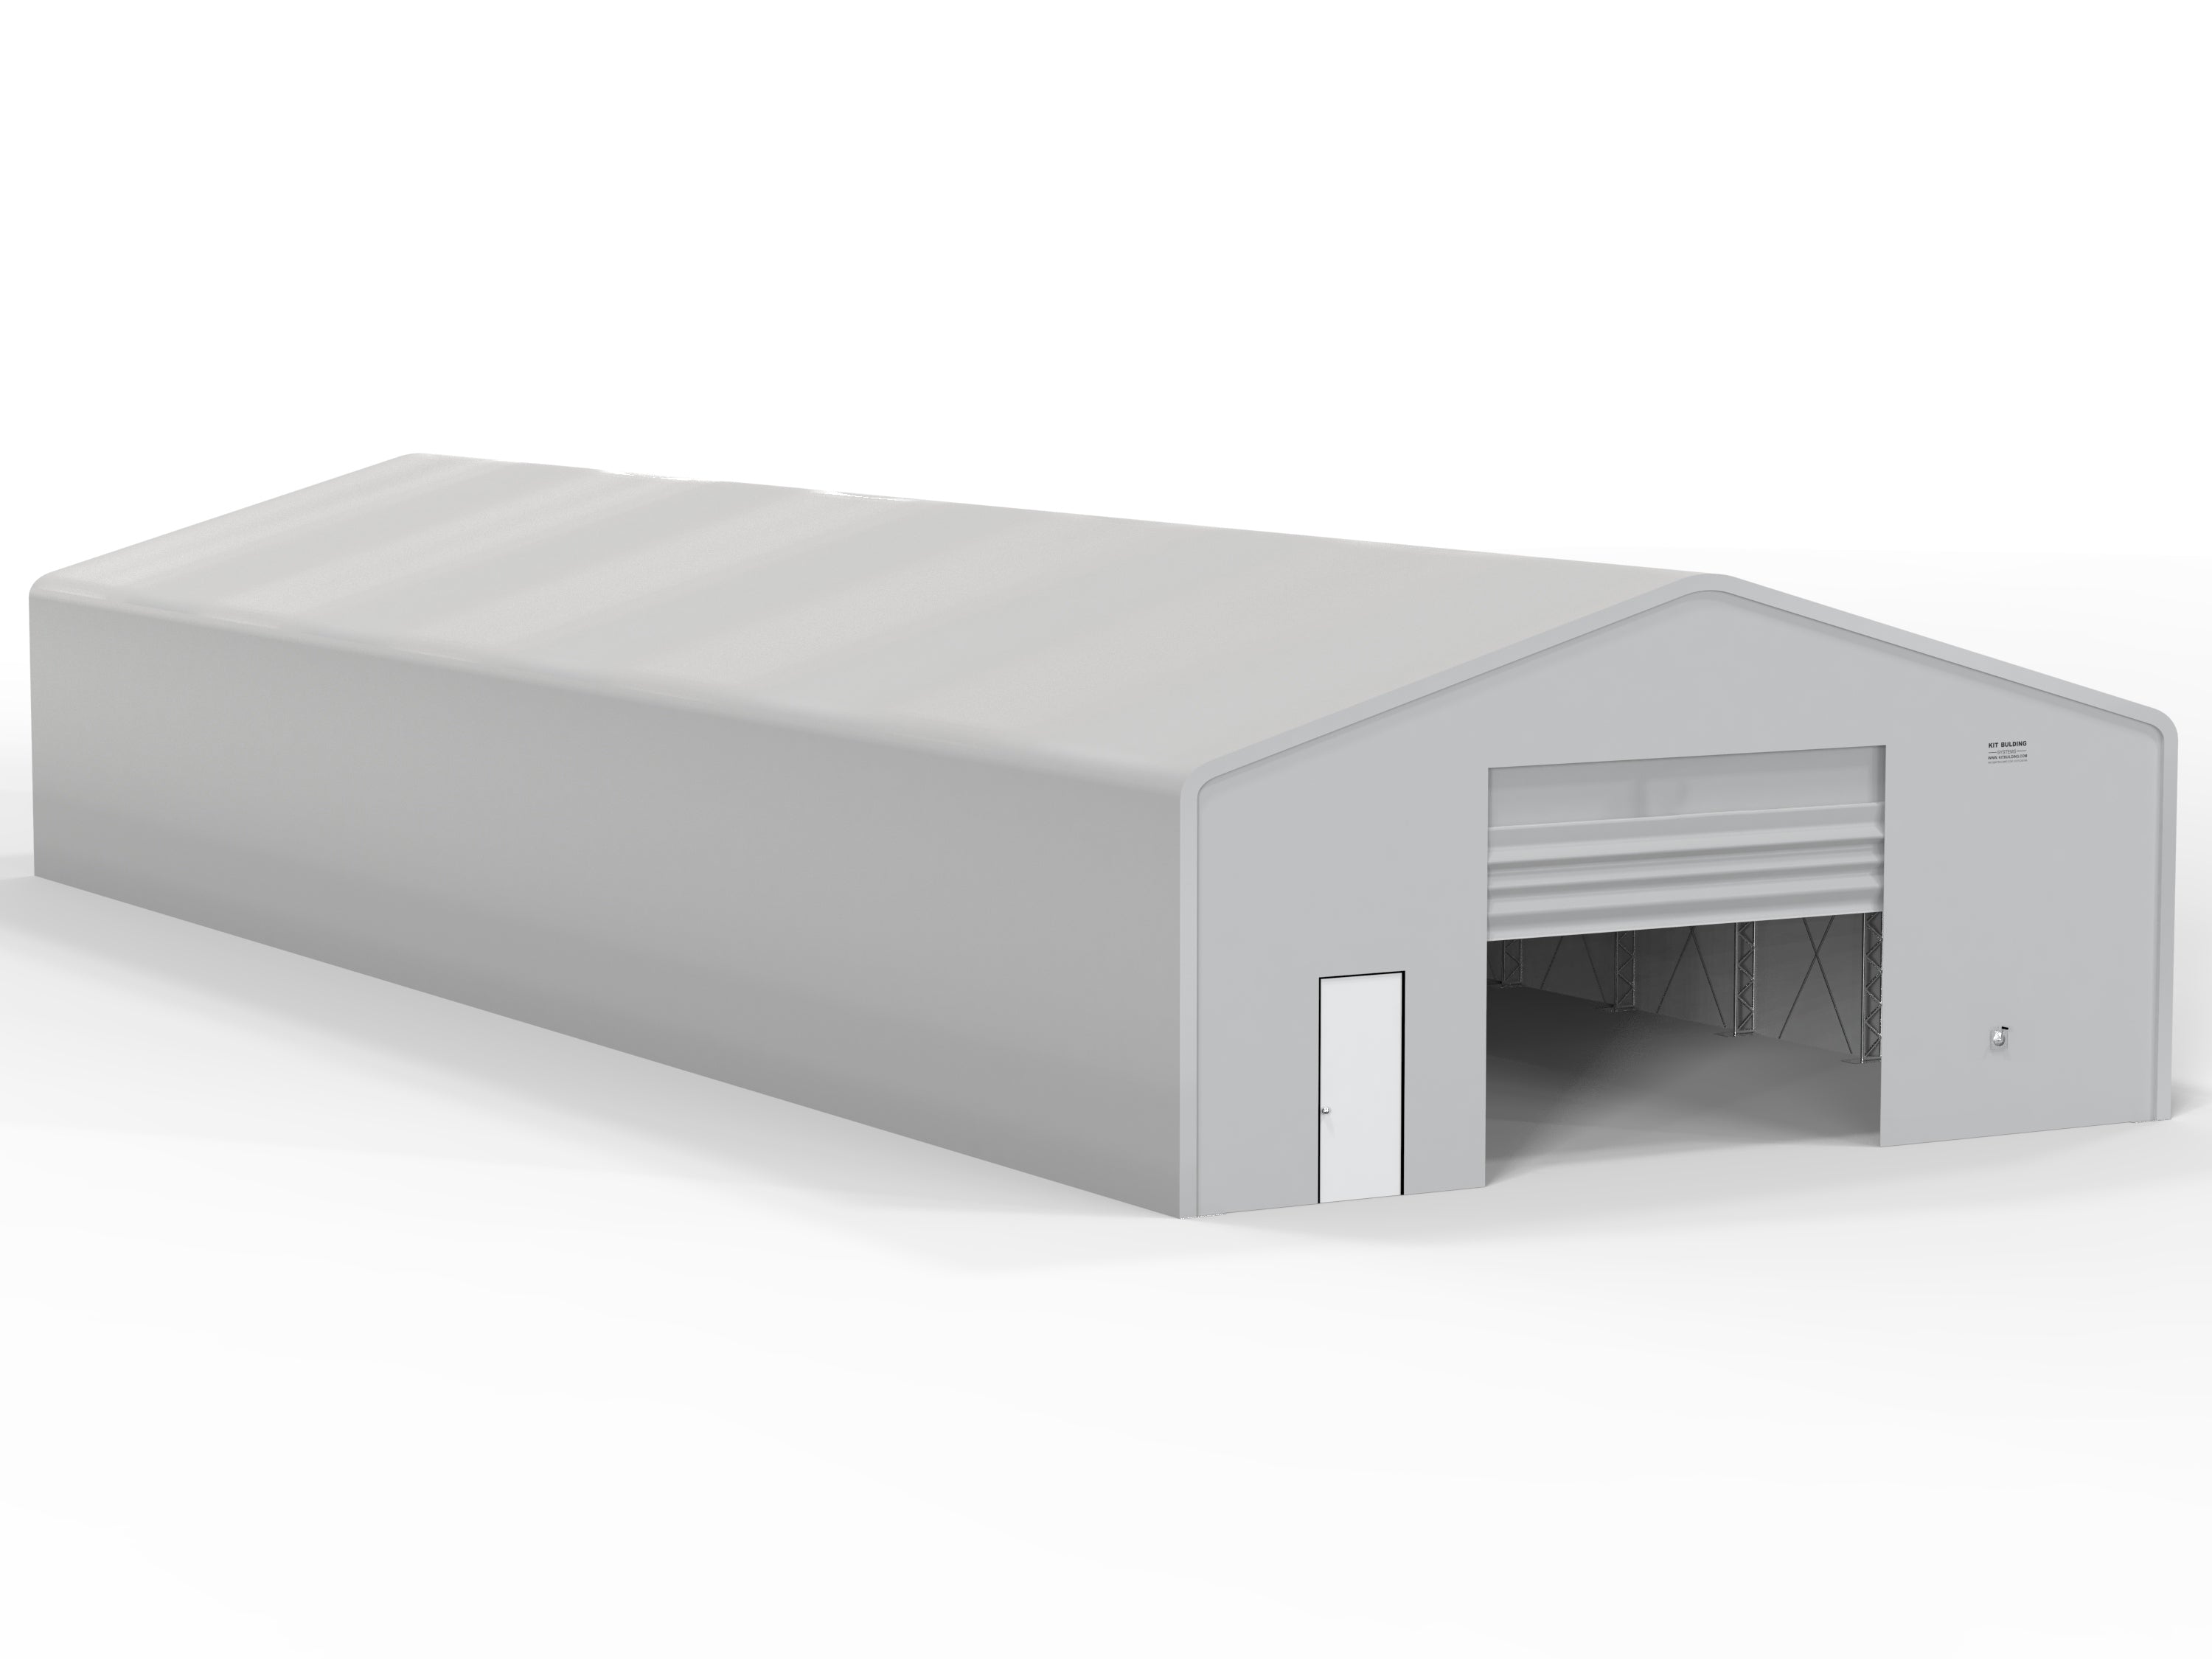 Double Truss PVC temporary storage building - Grey - Winch Operated PVC shutter